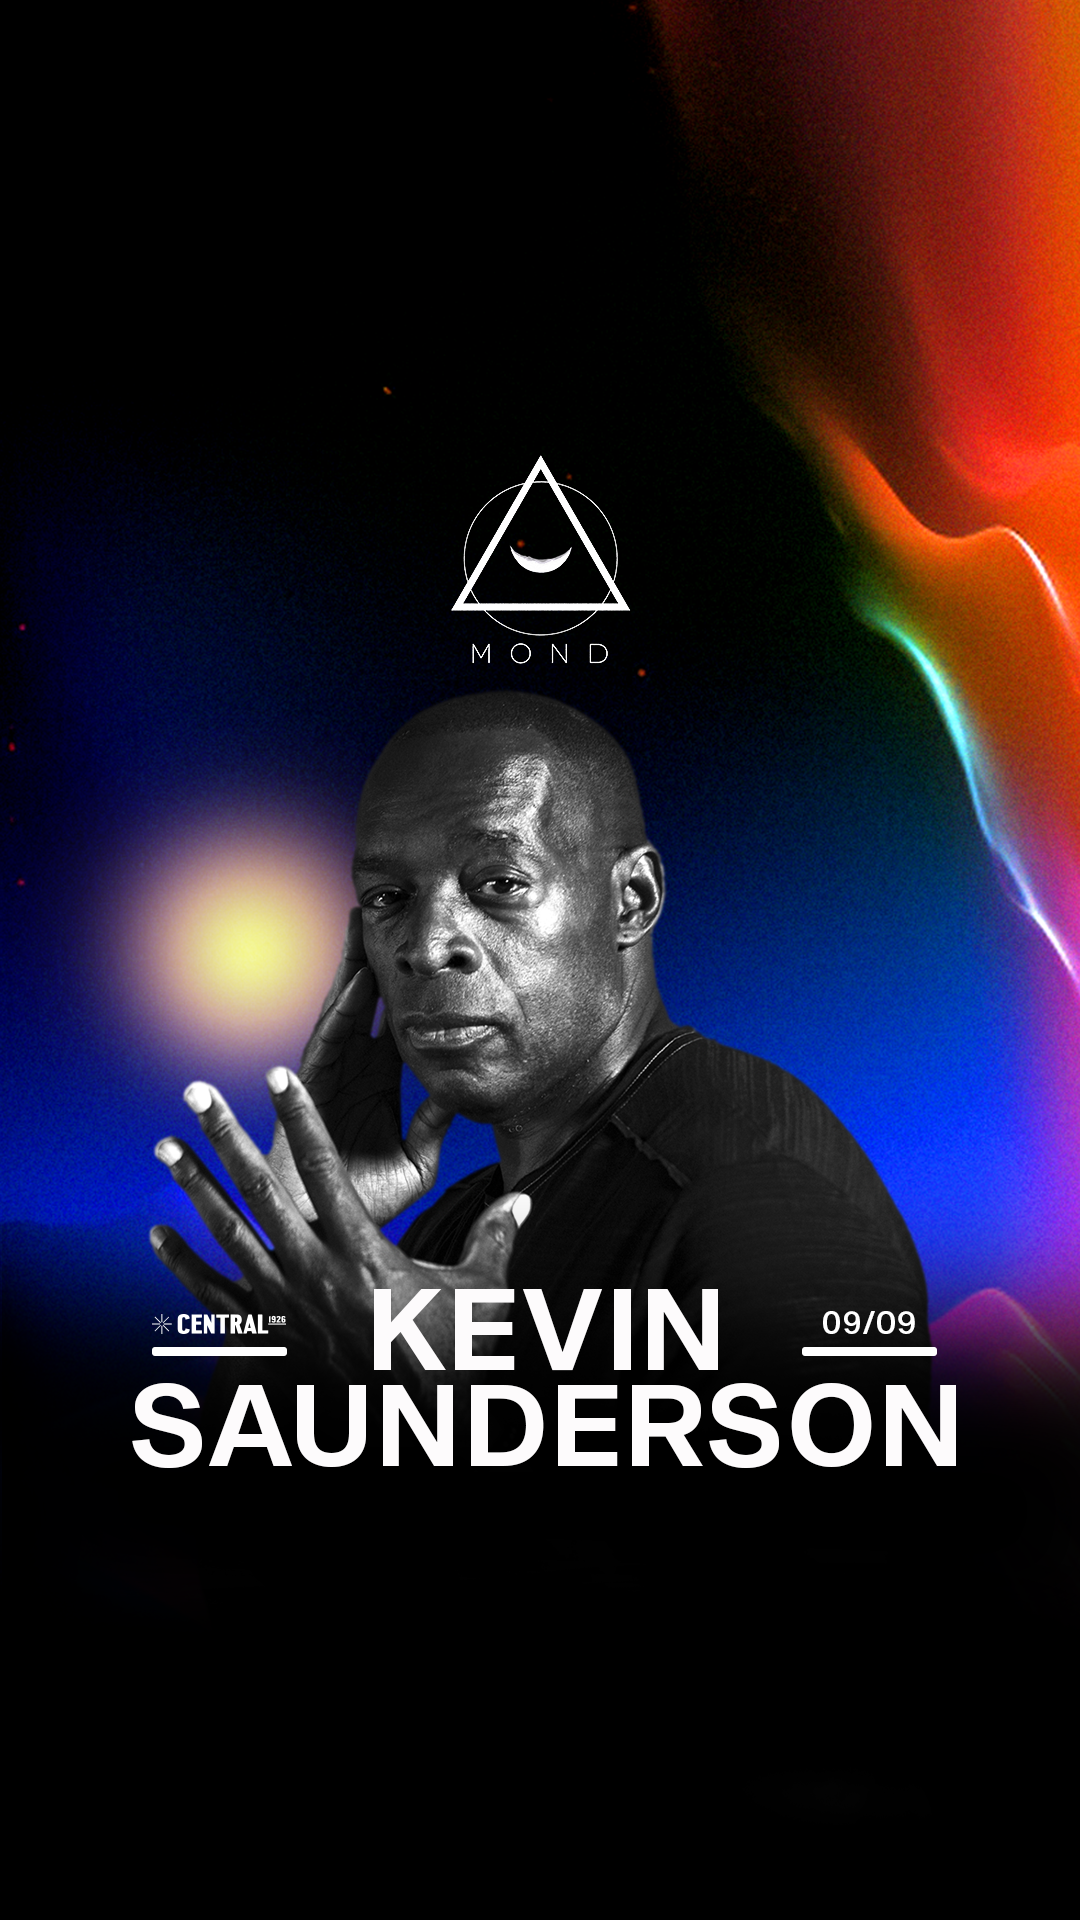 MOND PRESENTS Kevin Saunderson at CENTRAL 1926 - フライヤー表